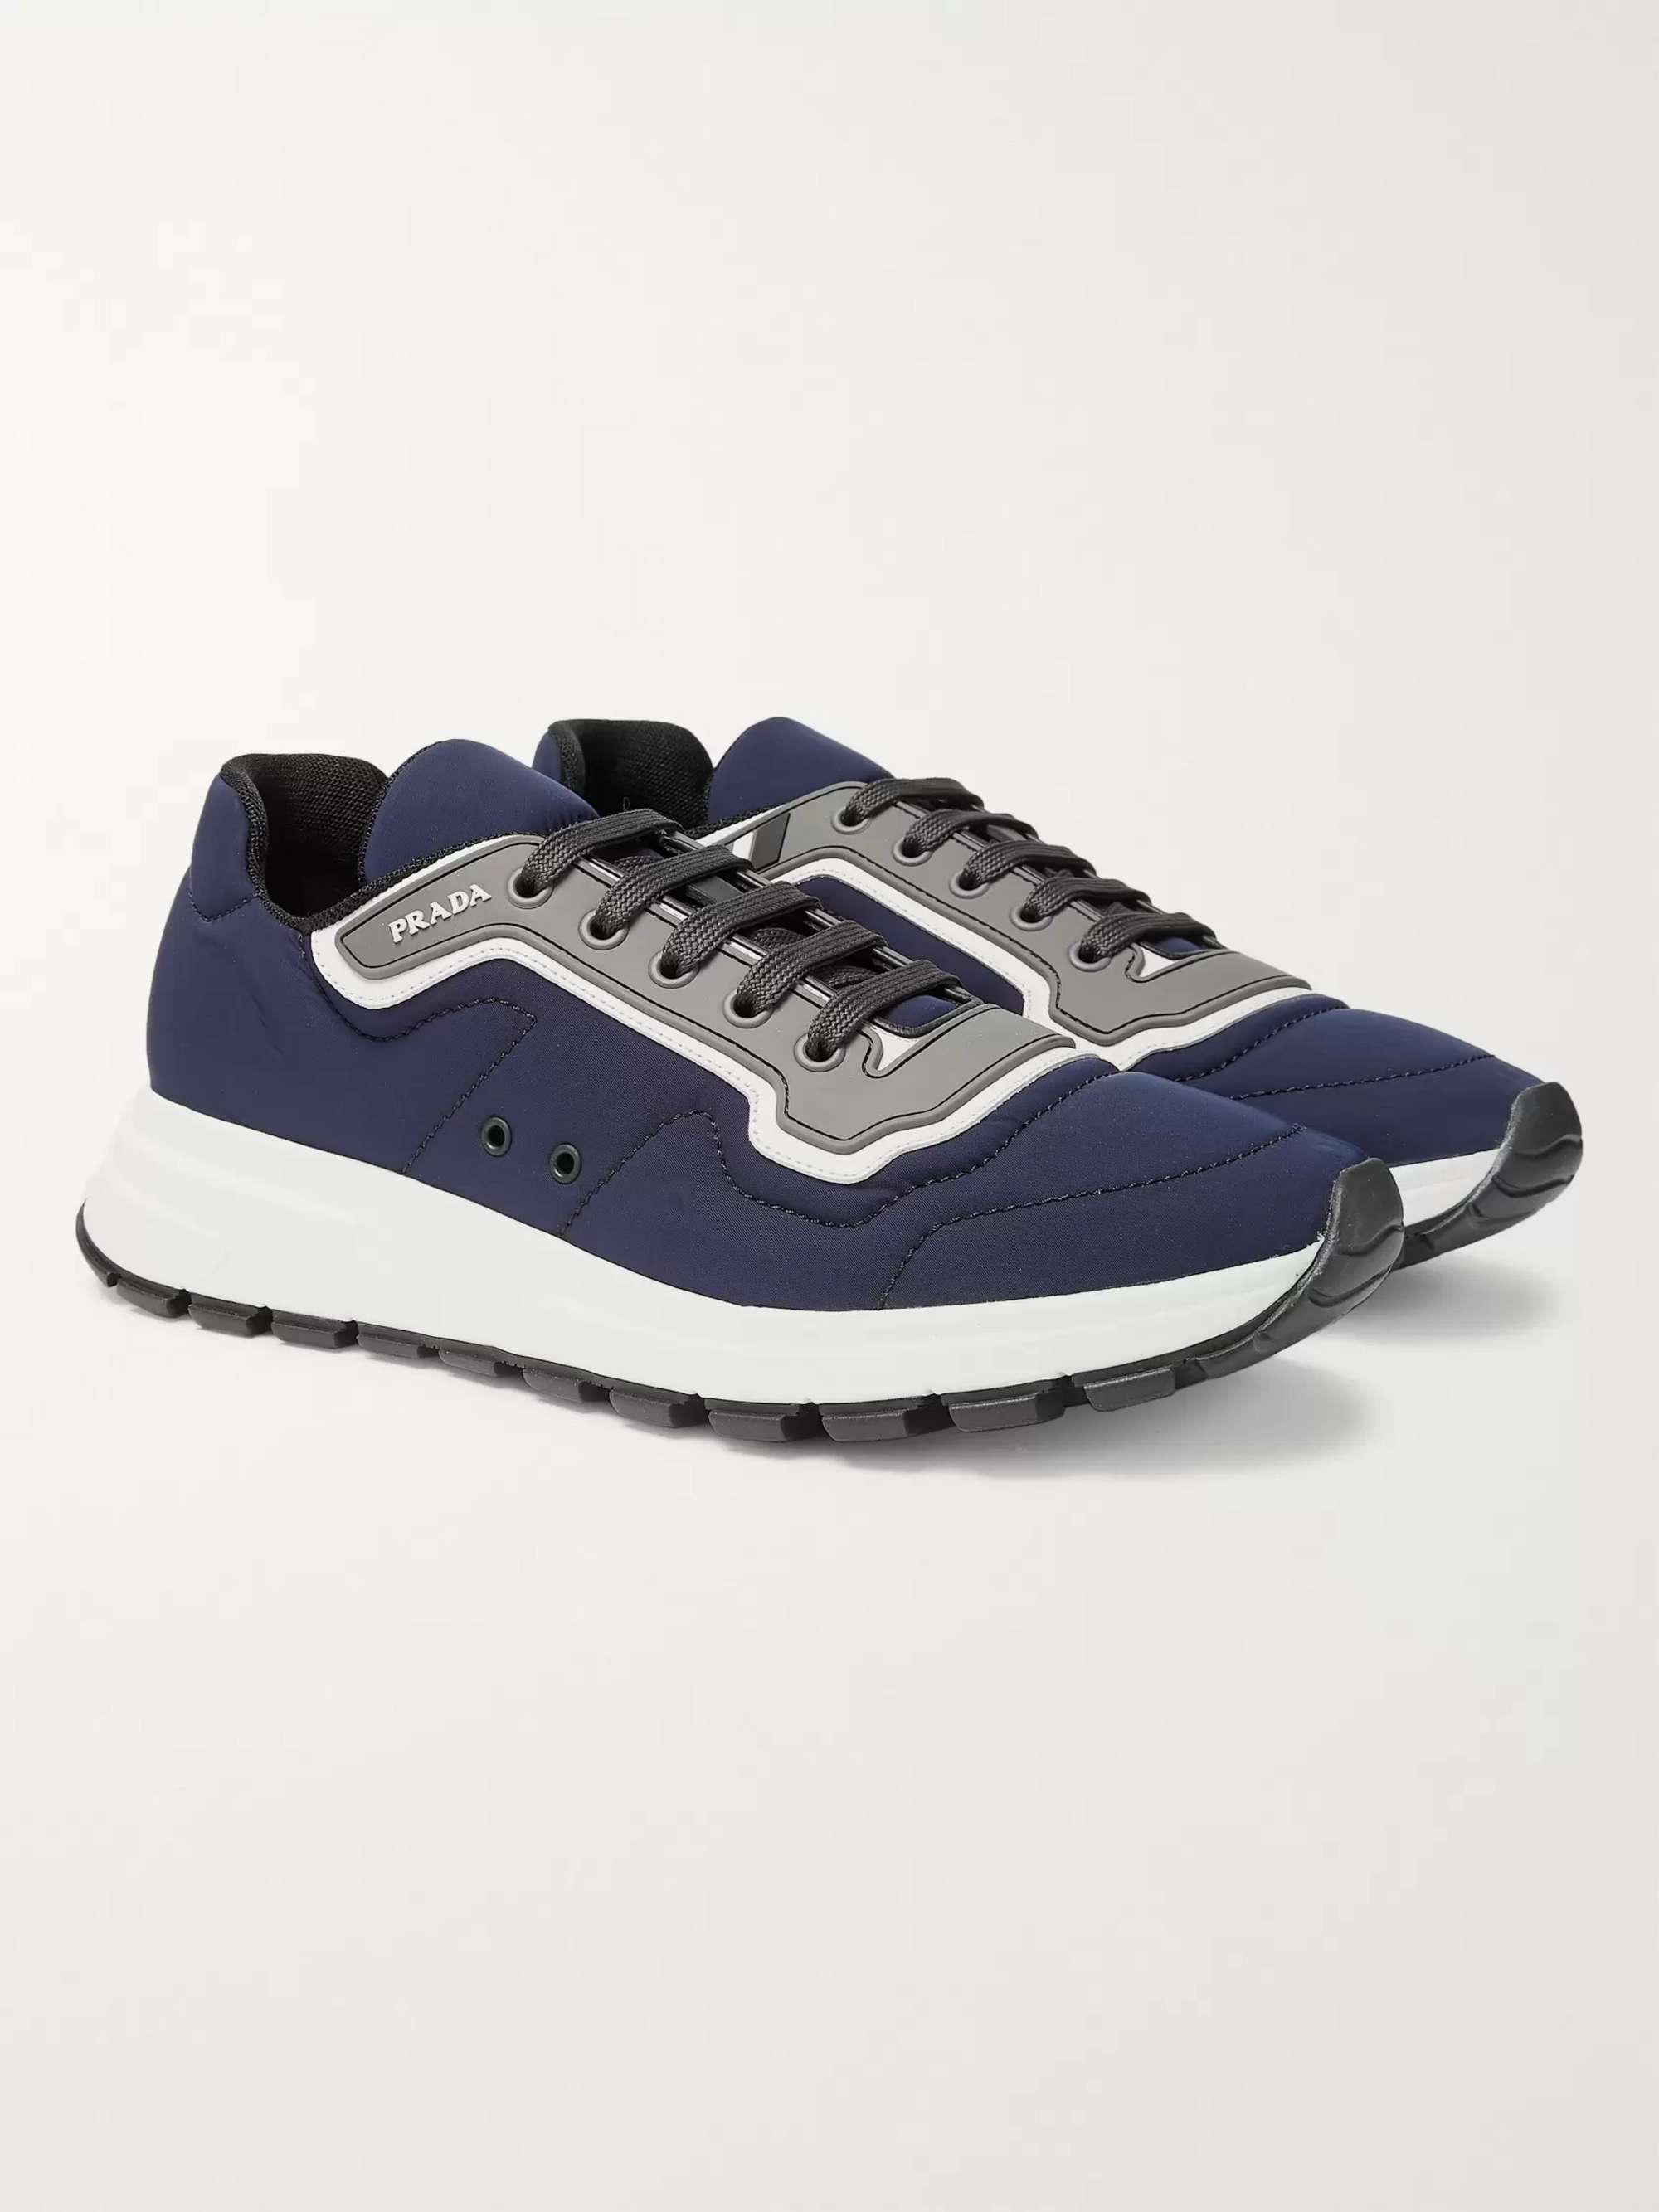 PRADA Match Race Rubber and Leather-Trimmed Nylon Sneakers